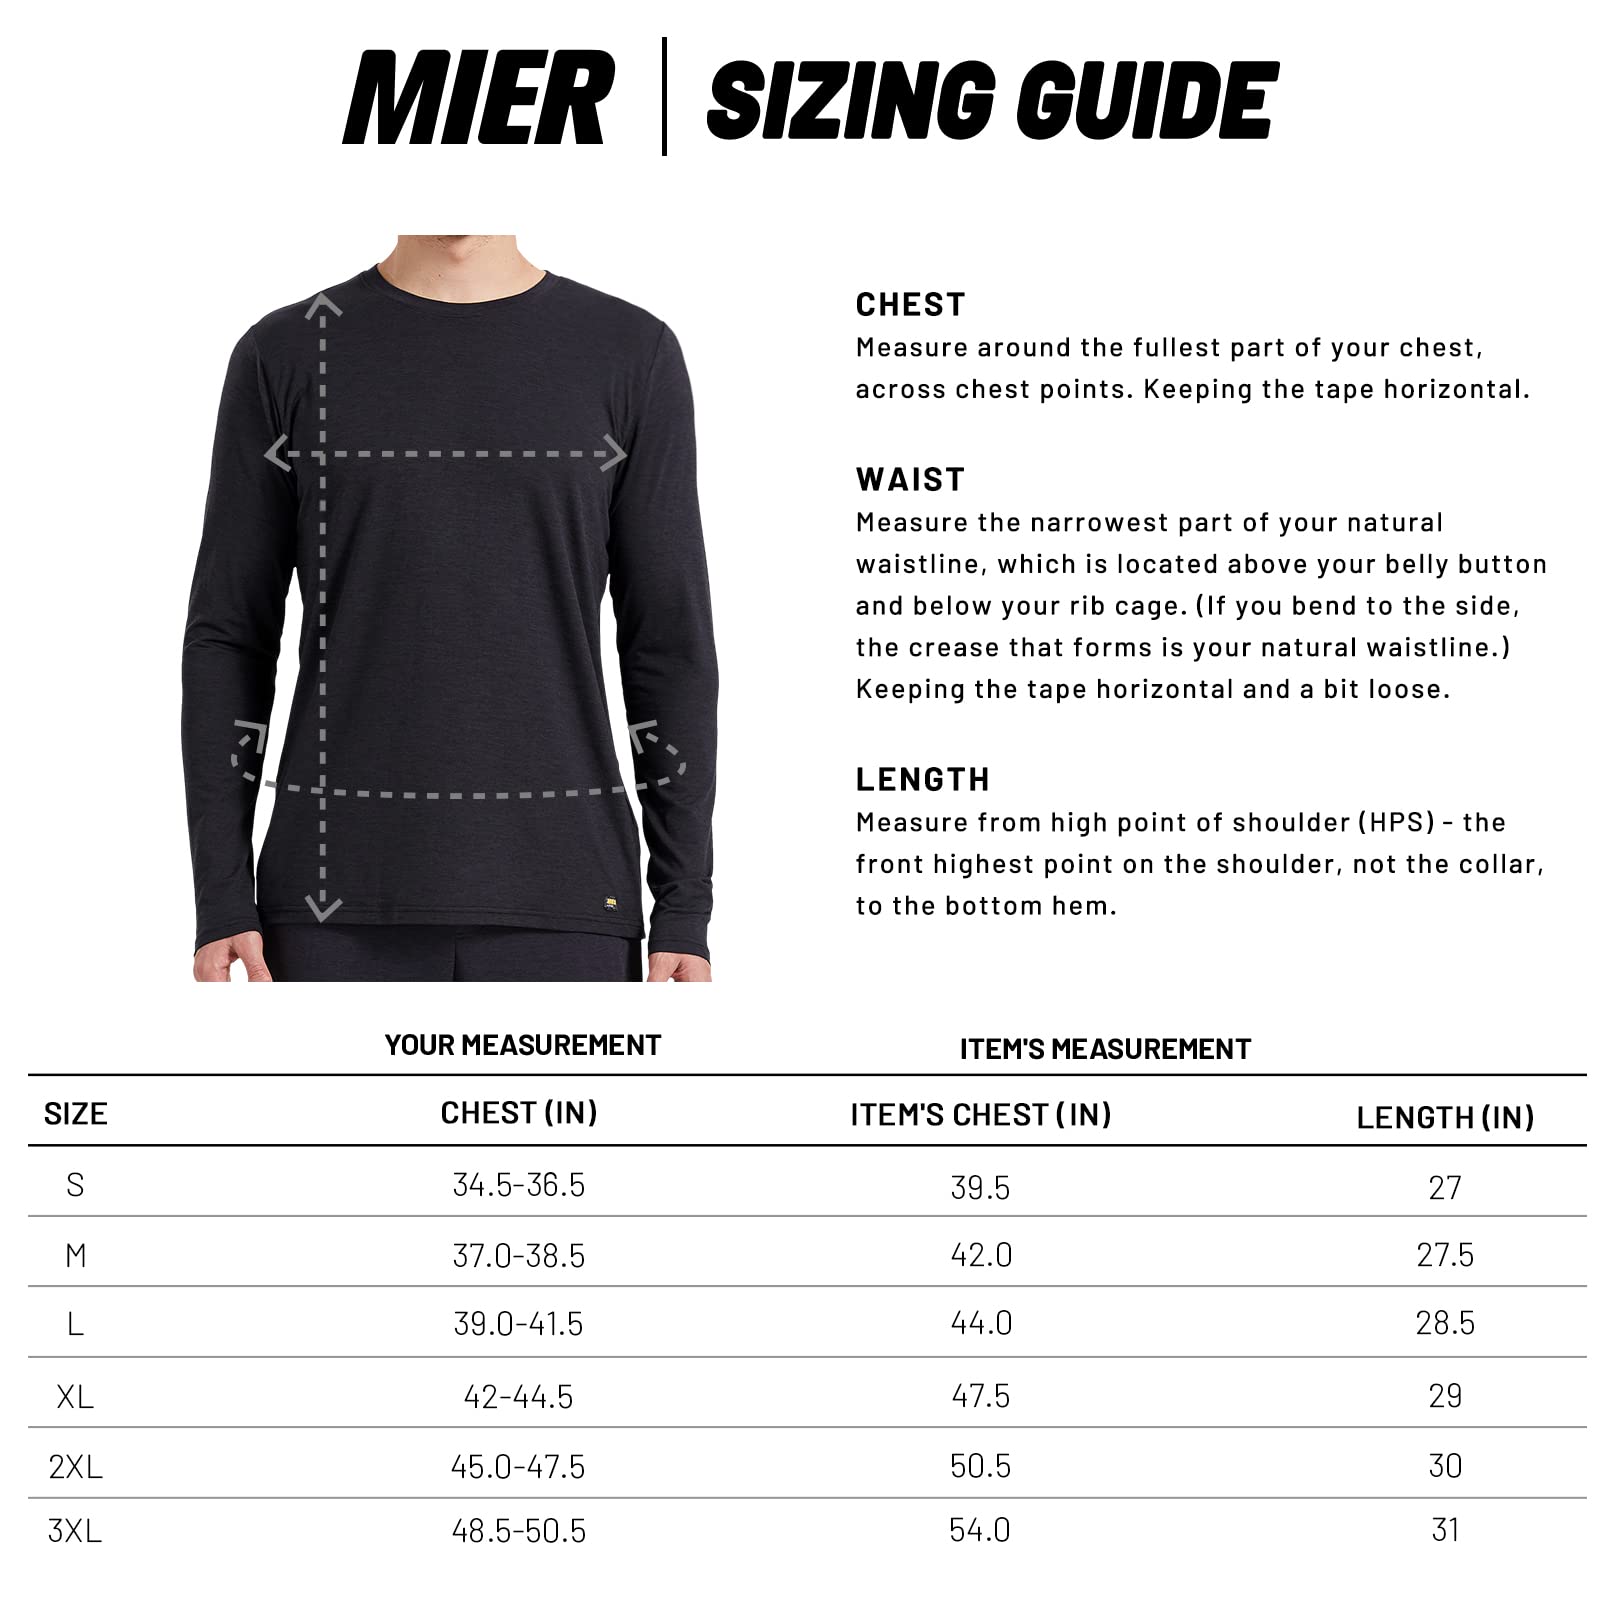 MIER X-Sofort Men's Long Sleeve Tee Shirts for Workout, Running, Gym, Athletic-Super Soft Crew Neck Lightweight T-Shirts MIER